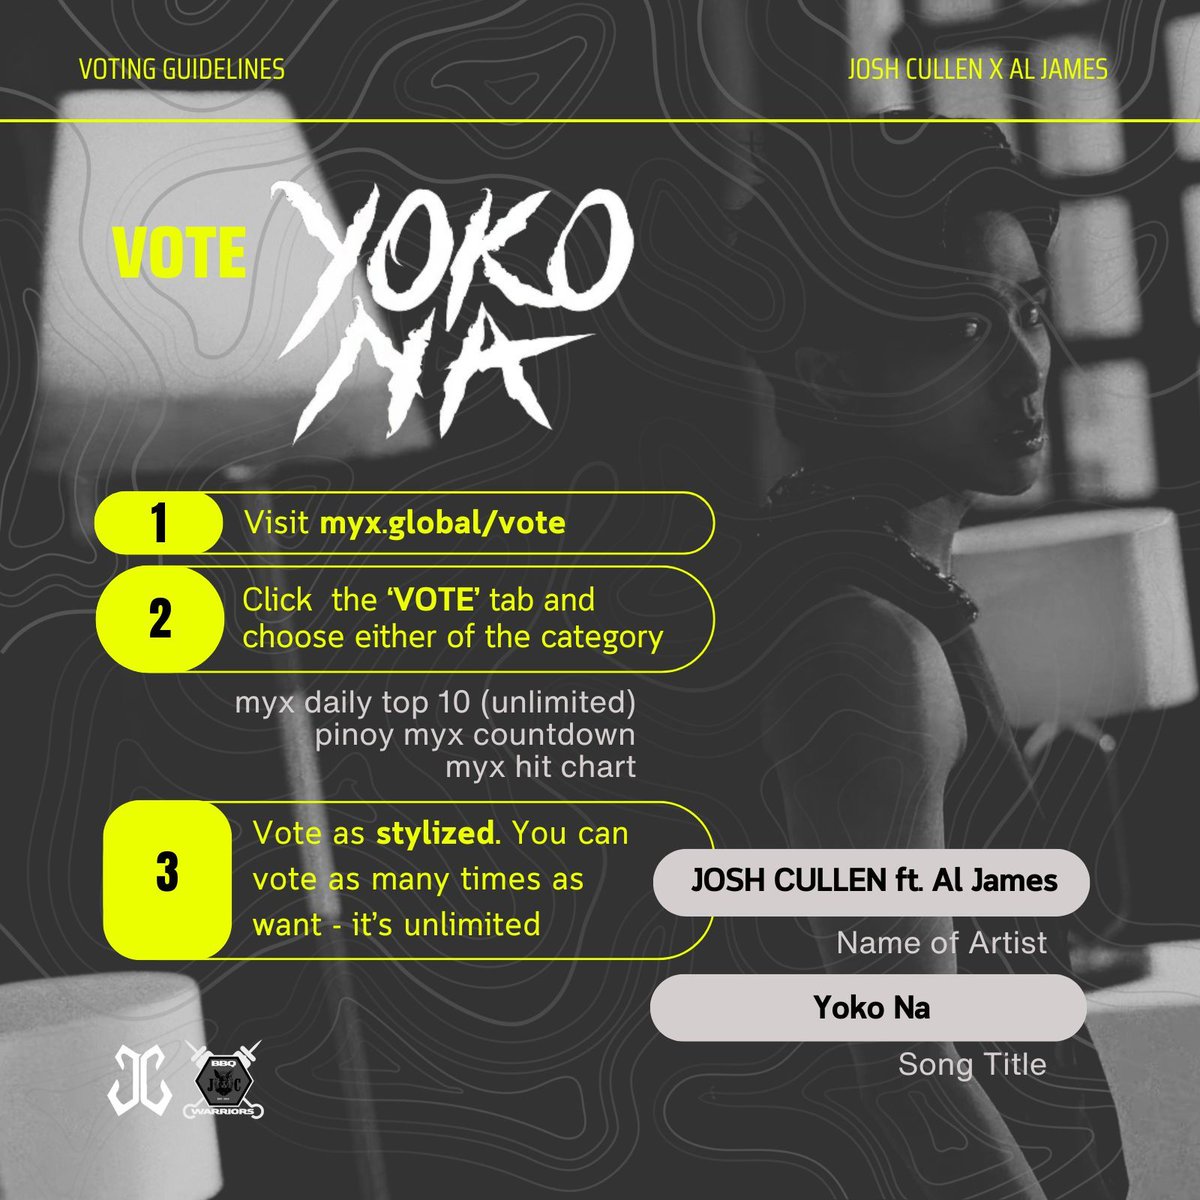 Cast your vote for #YOKONA by #JOSHCULLENxALJAMES on MYX! See links below:

DAILY TOP 10
buff.ly/3U5KpBc

HIT CHART
buff.ly/3TH4dL1

PINOY COUNTDOWN
buff.ly/3U9hLzm

Name of Artist: JOSH CULLEN ft. Al James
Title of Song: Yoko Na
(Vote as stylized)